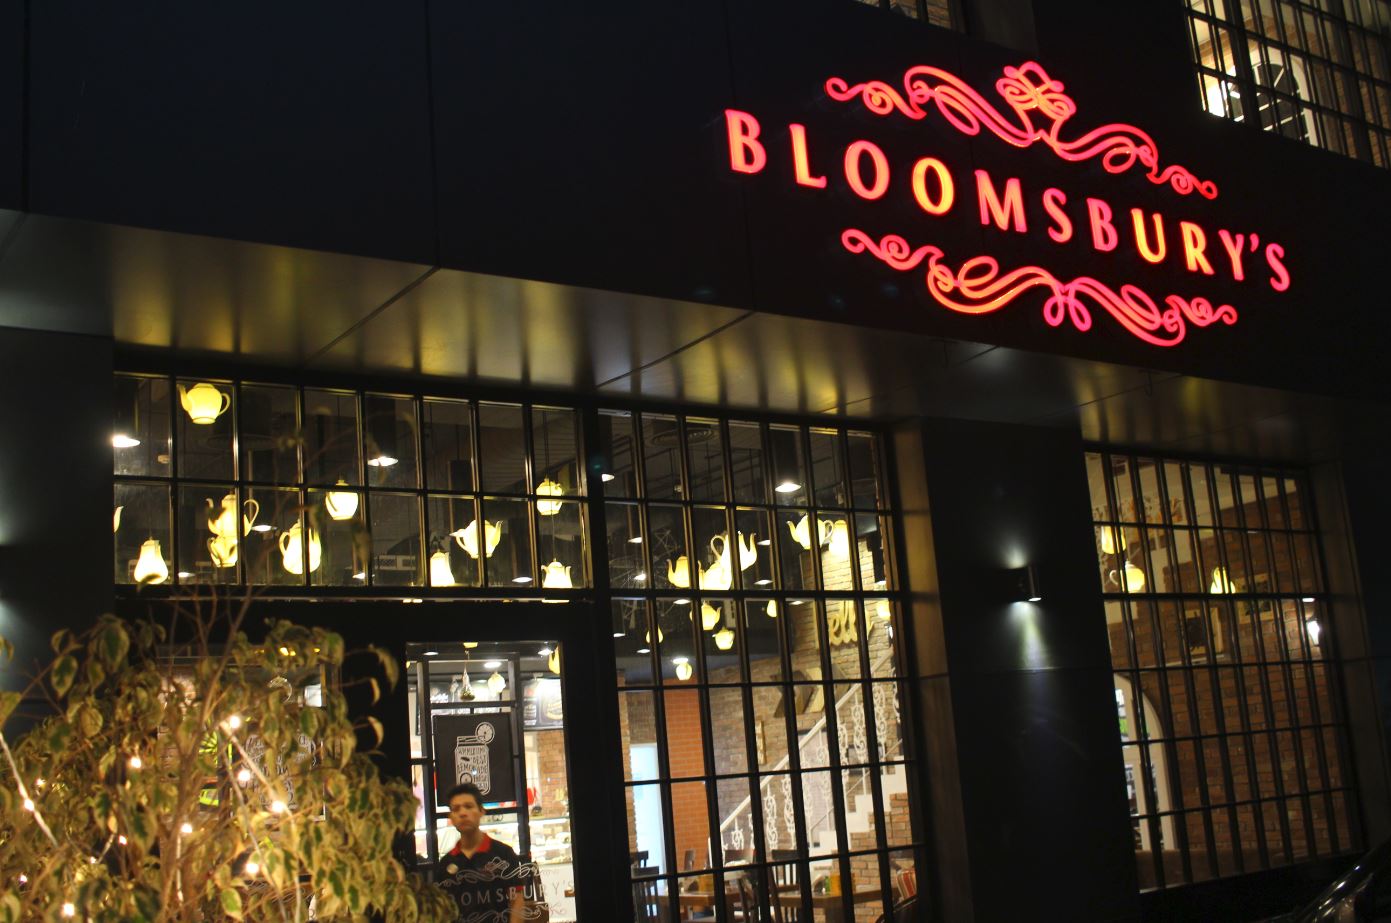 Bloomsbury's cafe in Kochi India designed by DZ Design